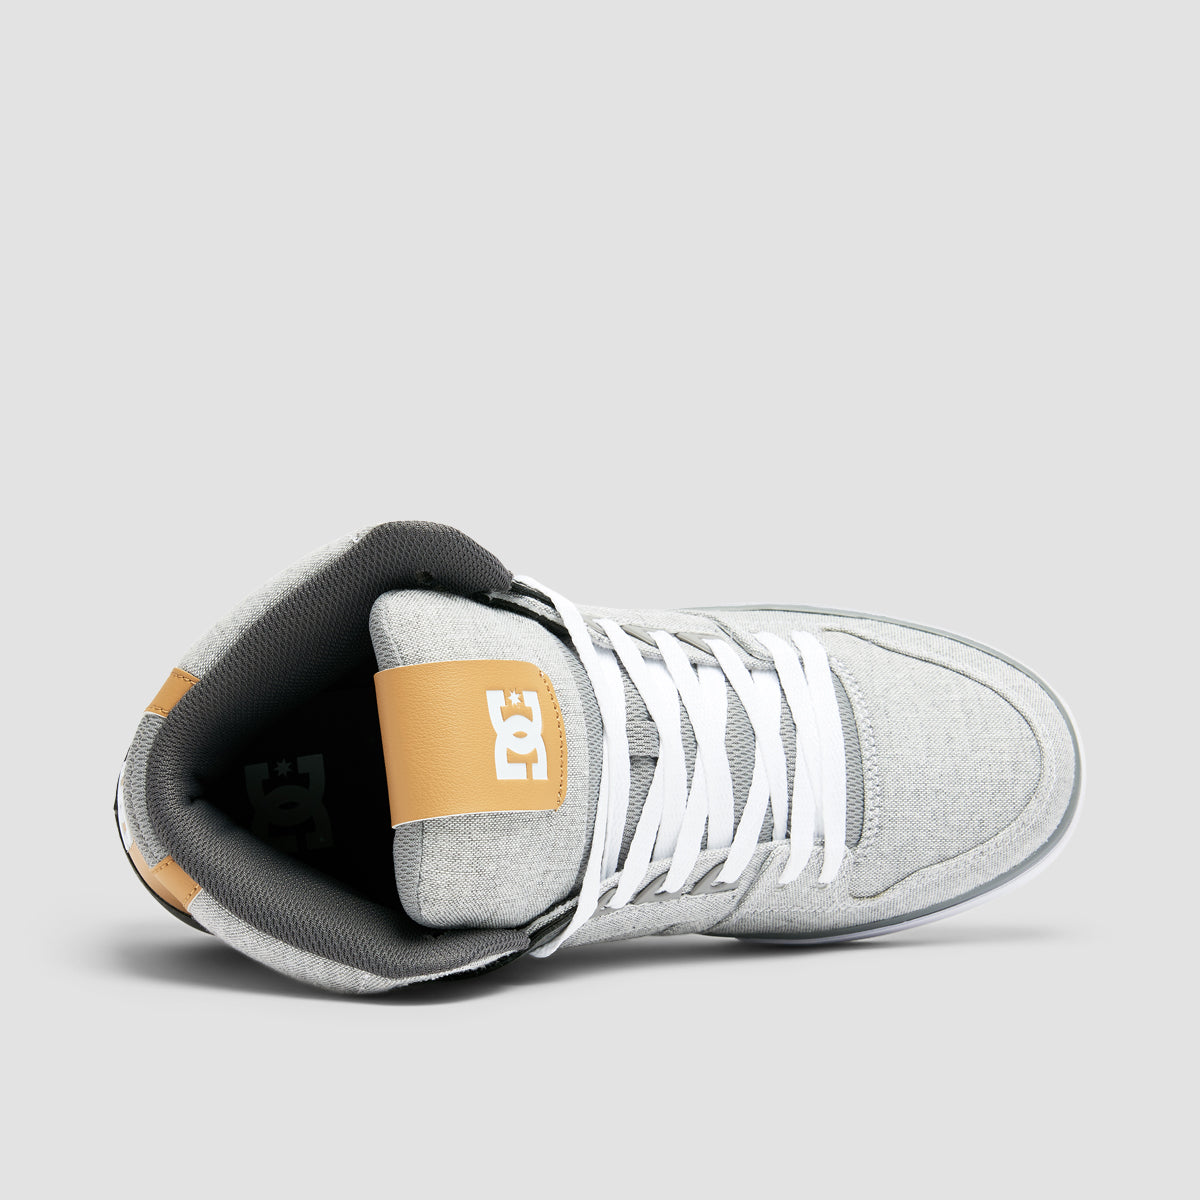 DC Pure WC High Top Shoes - Grey/Grey/White